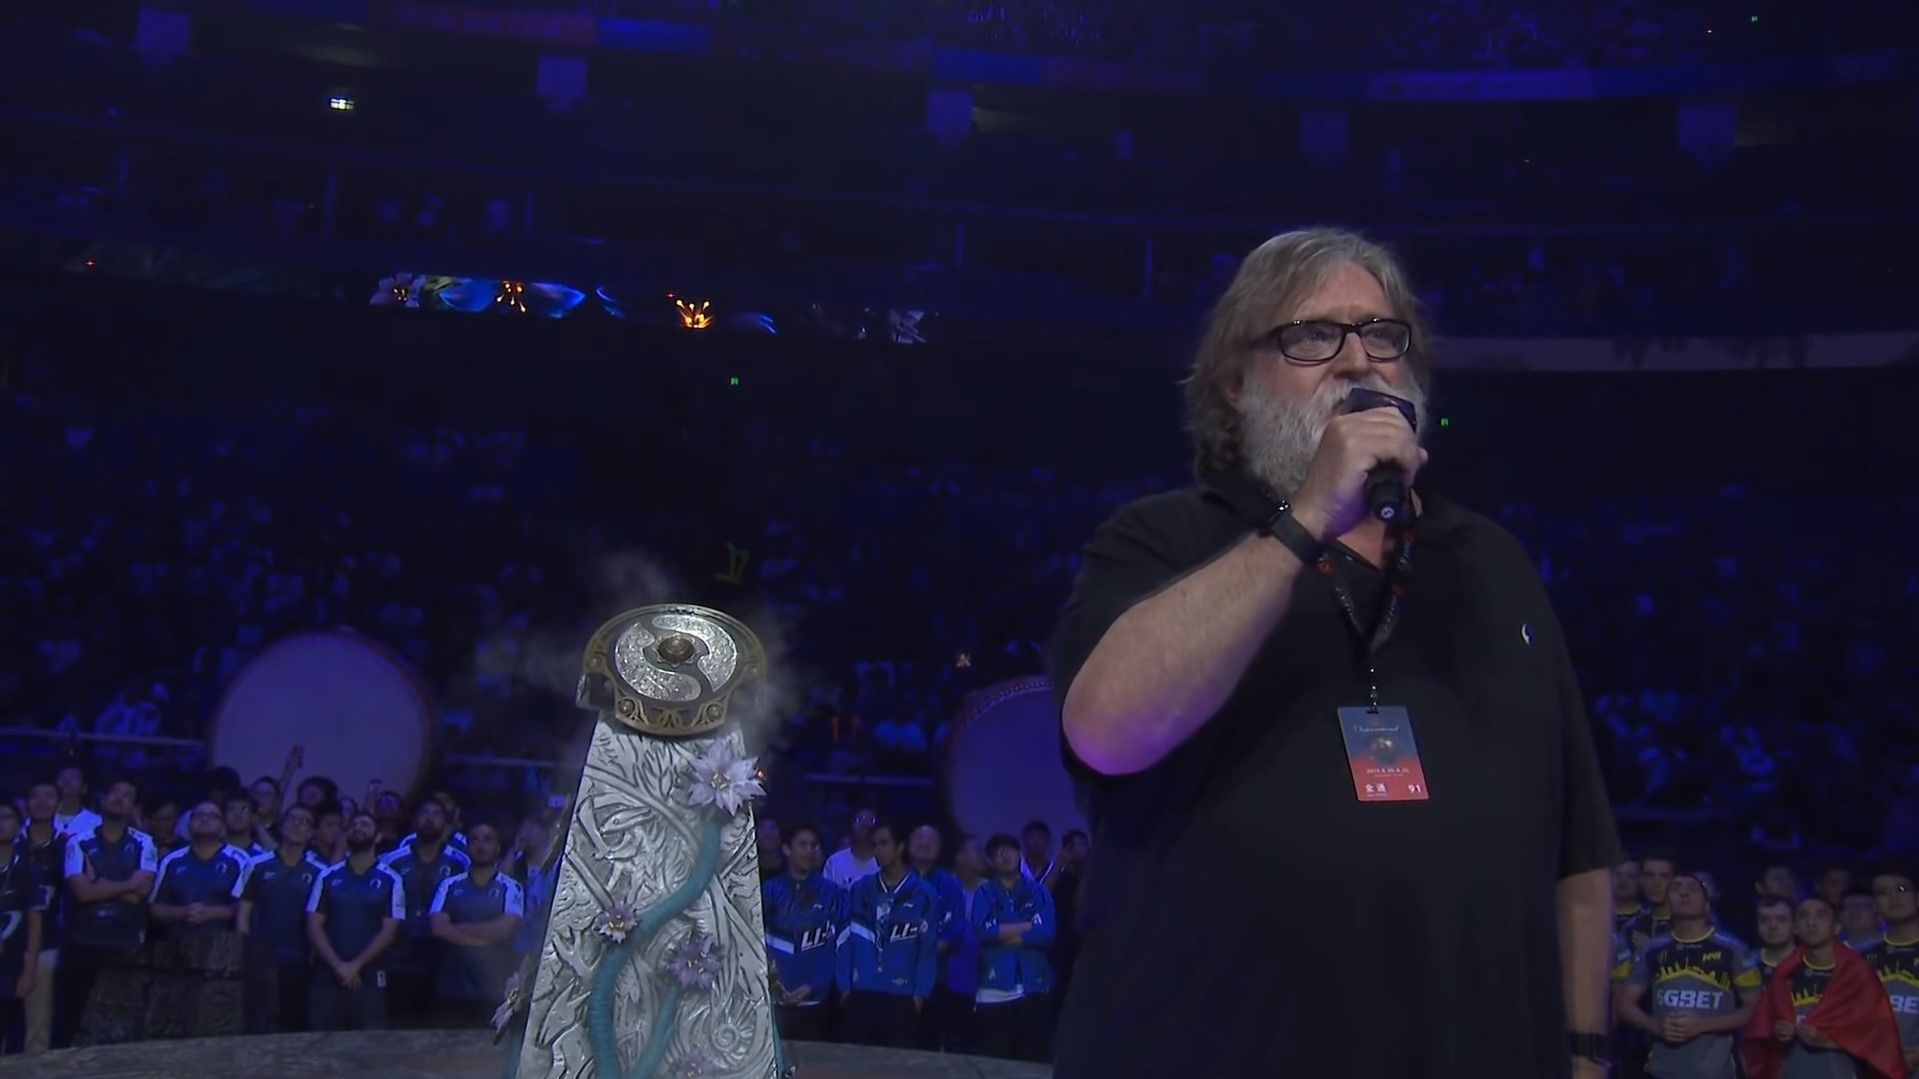 Gabe Newell Has Been Stuck in New Zealand Since COVID-19 Pandemic Began